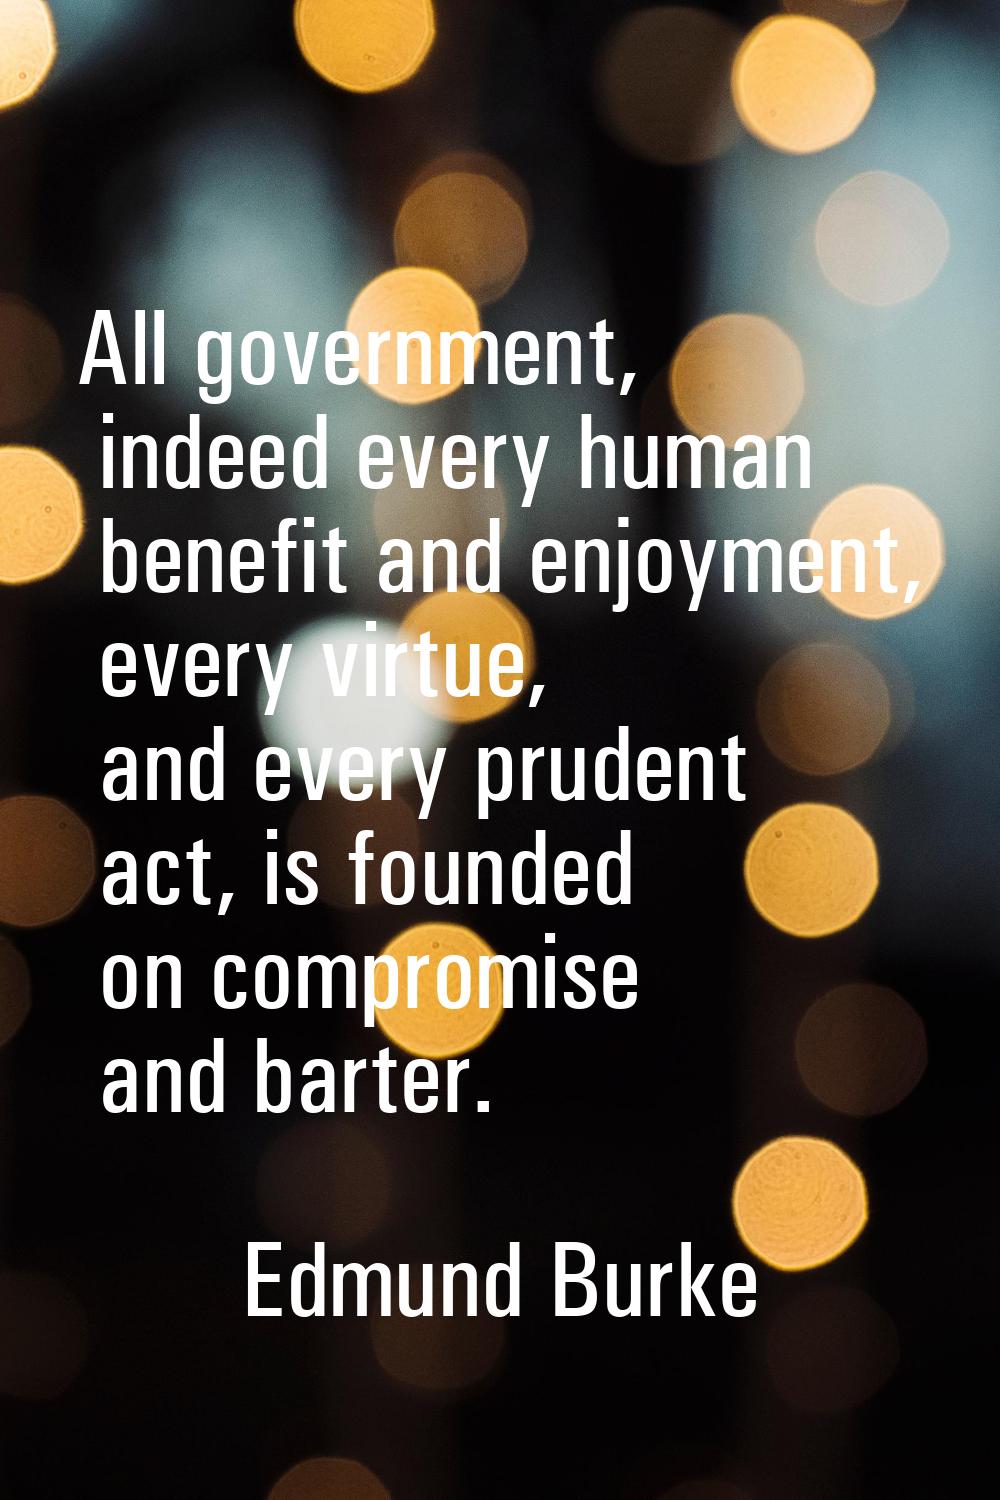 All government, indeed every human benefit and enjoyment, every virtue, and every prudent act, is f